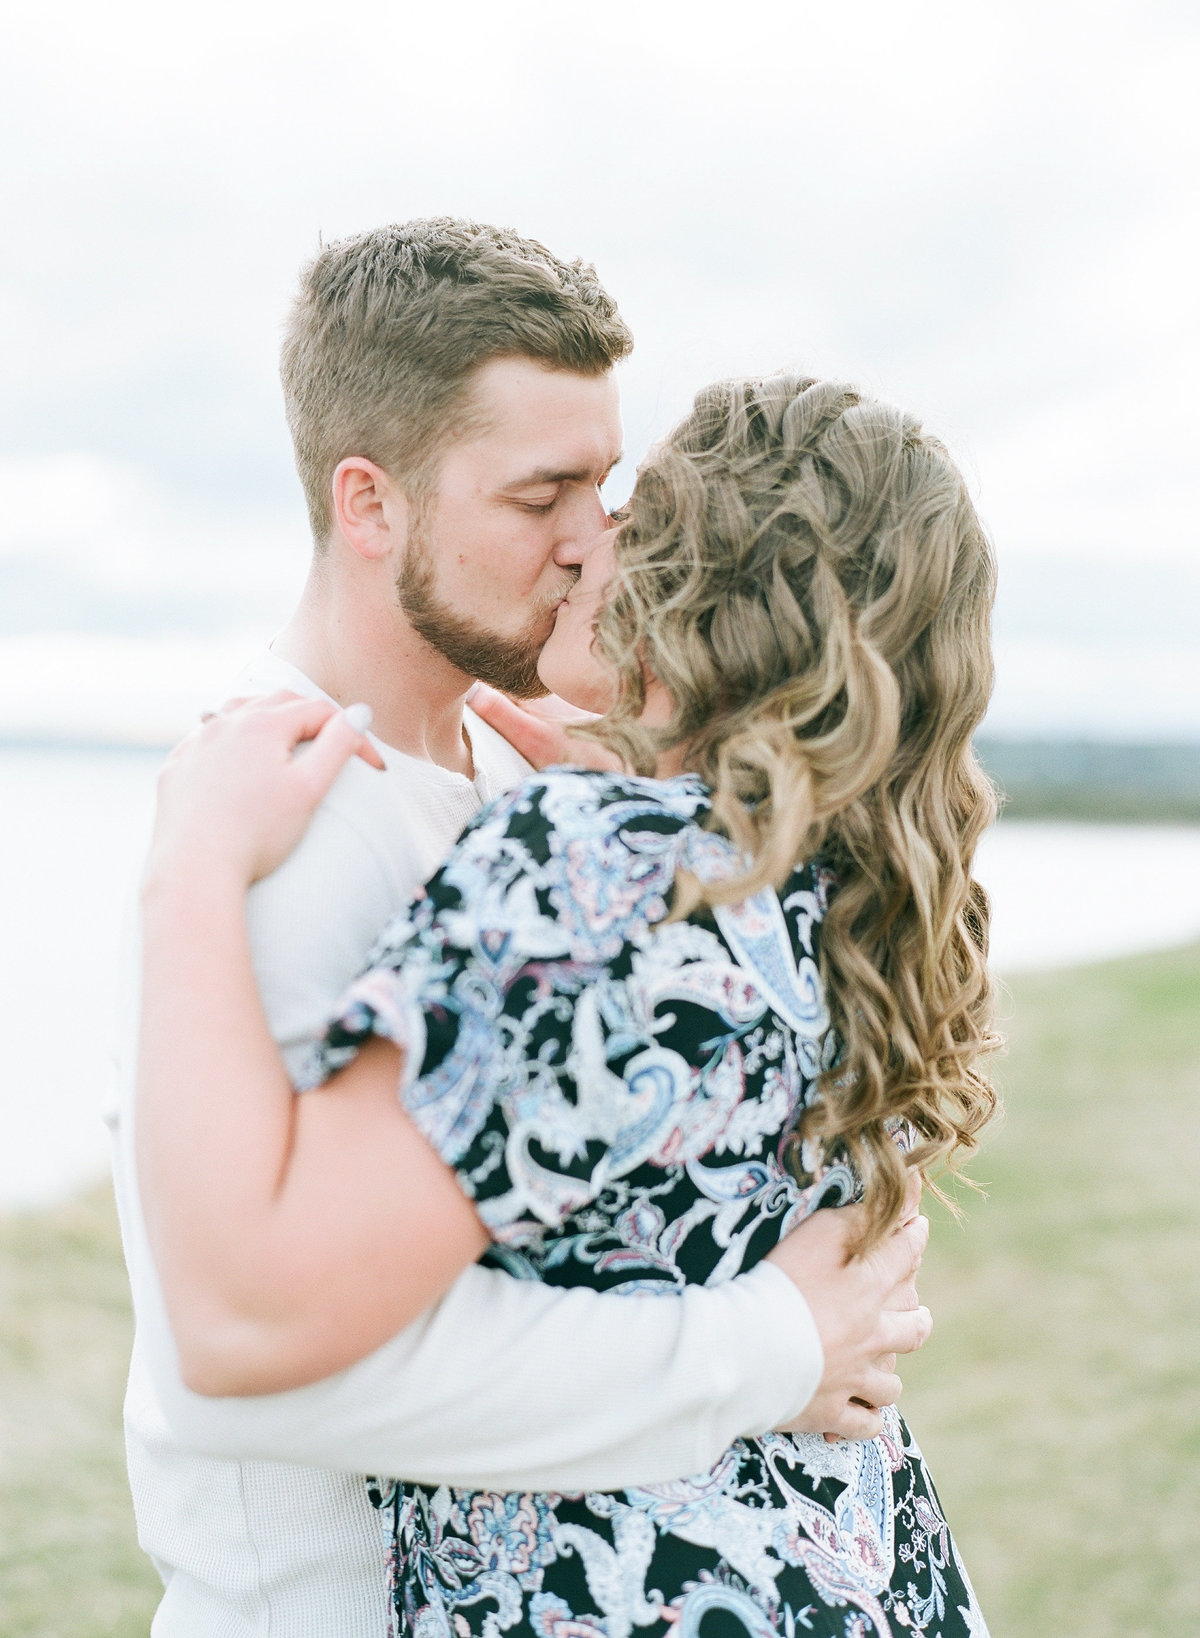 Jacqueline Anne Photography - Akayla and Andrew - Lawrencetown Beach-46